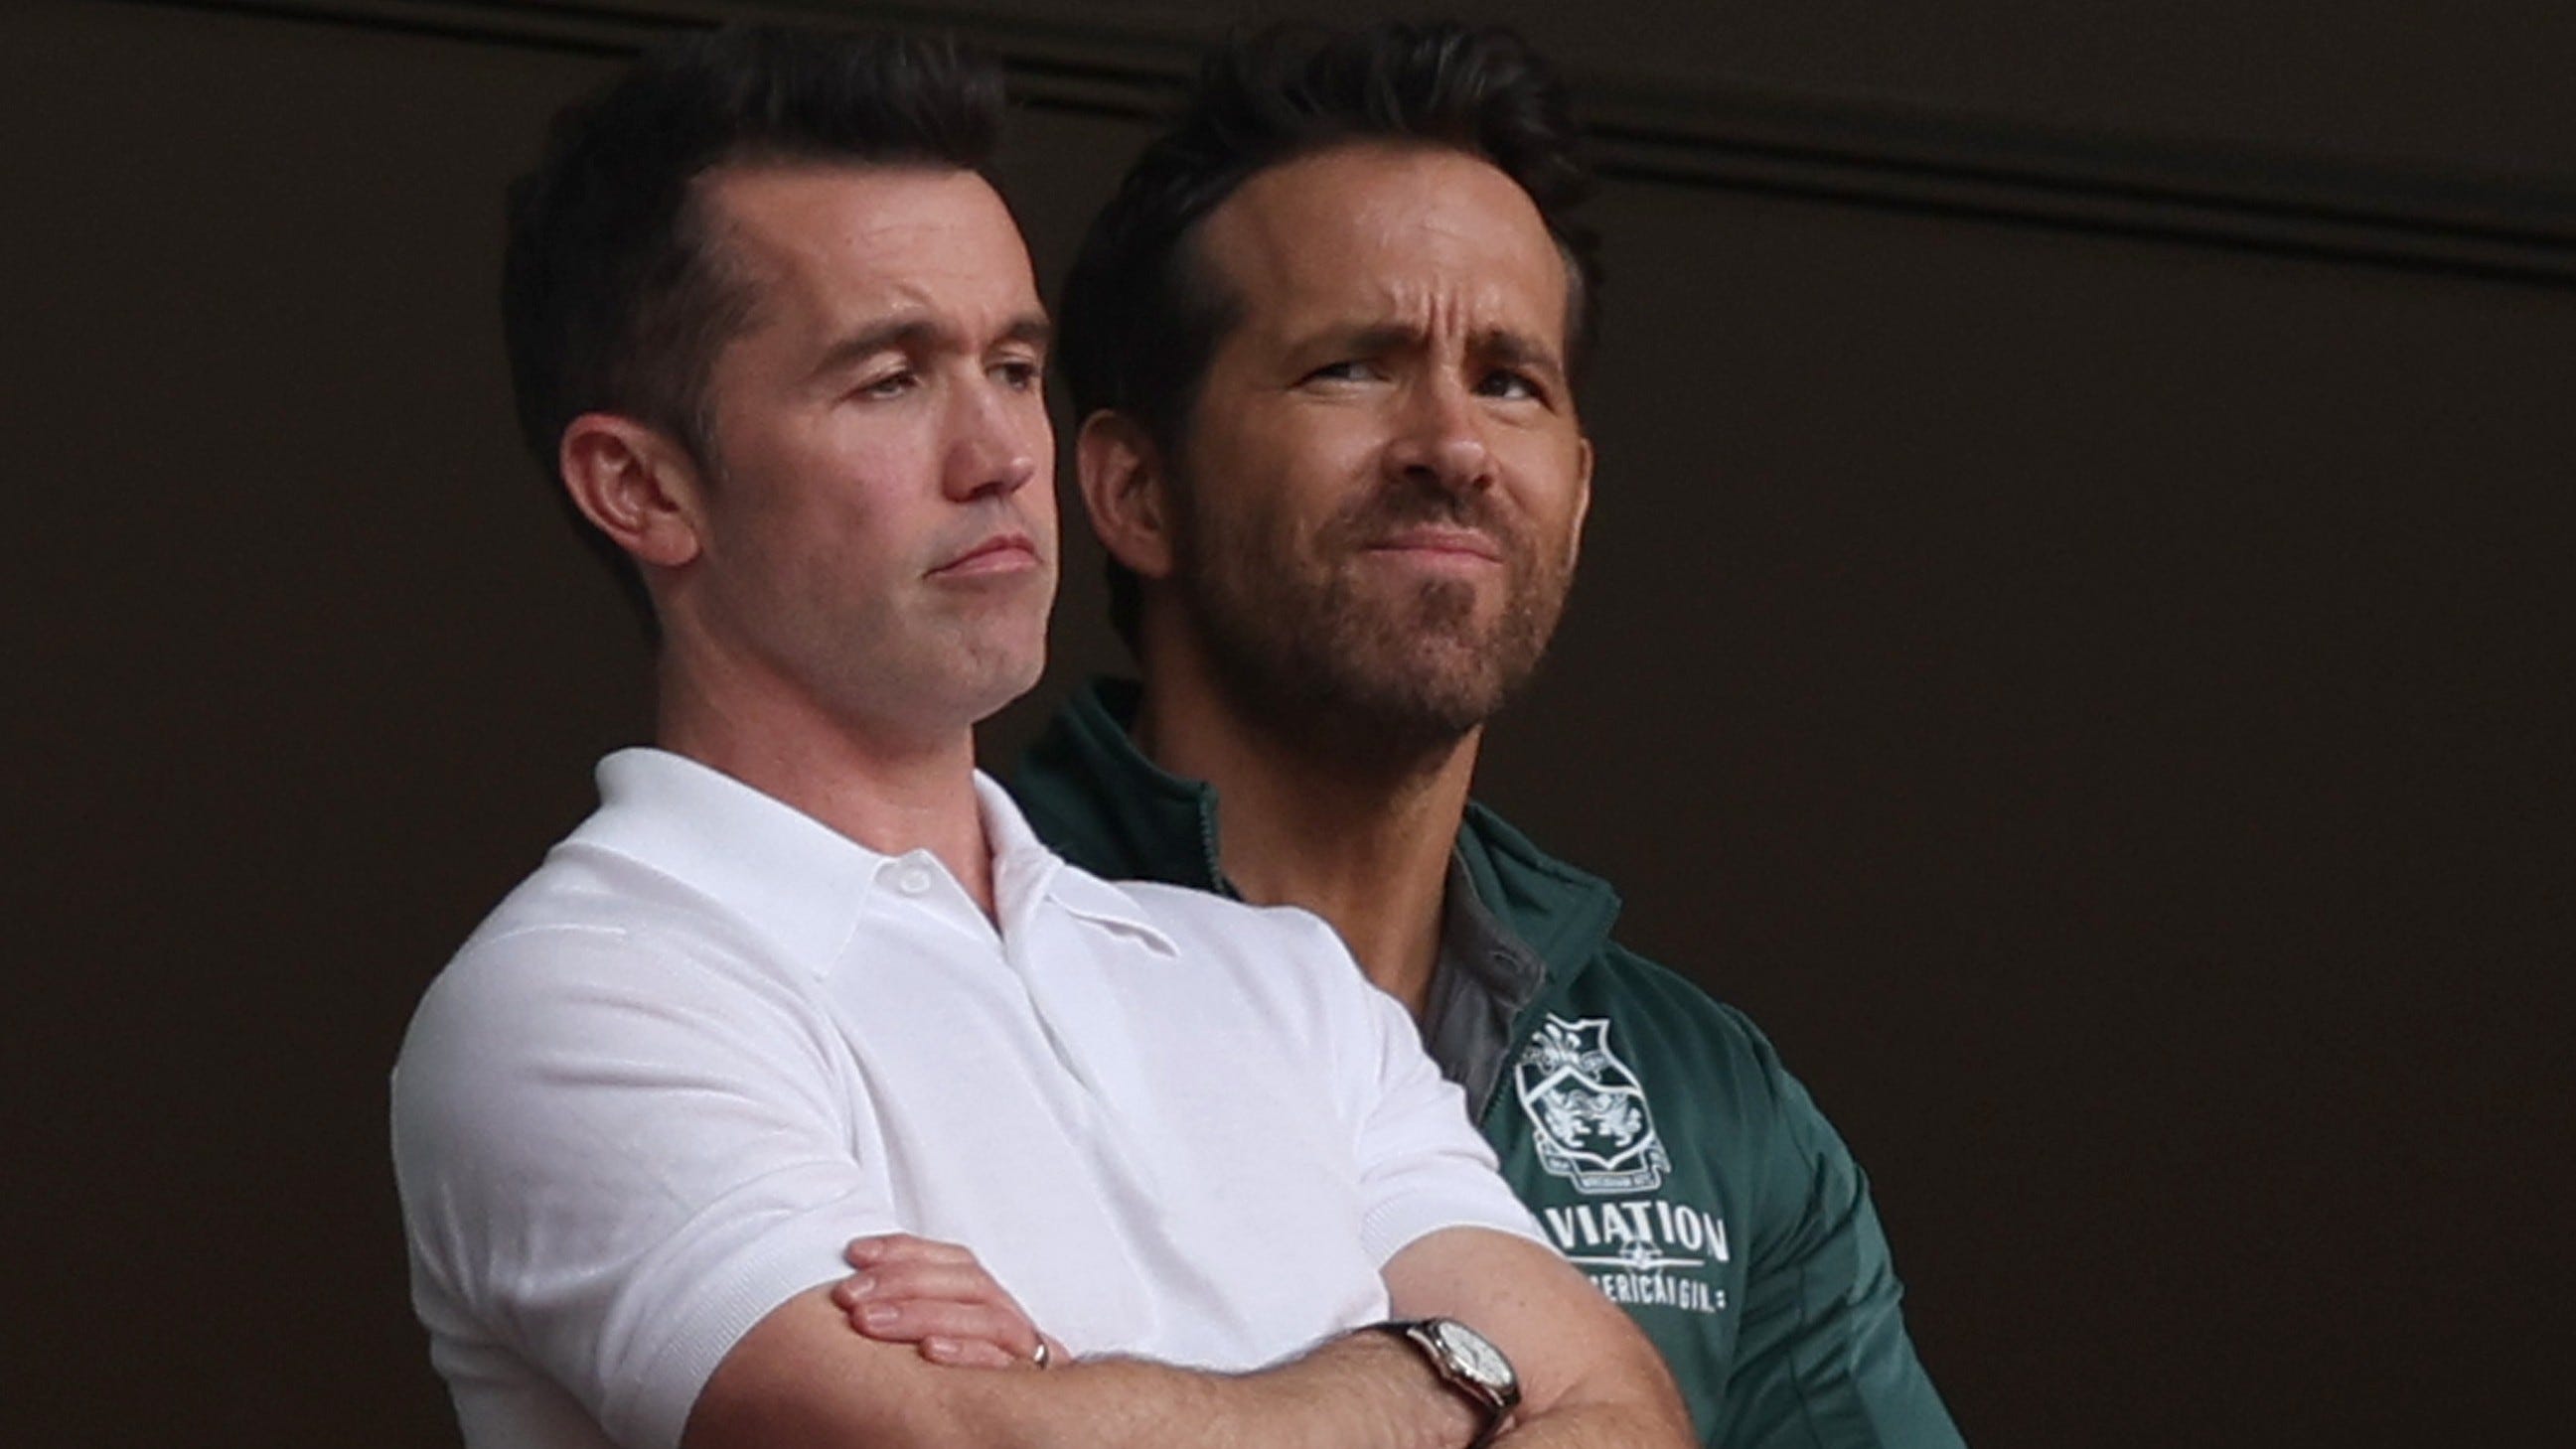 Wrexham aren't good enough for the Championship! Ryan Reynolds and Rob McElhenney told improvement needed to keep Premier League dream alive